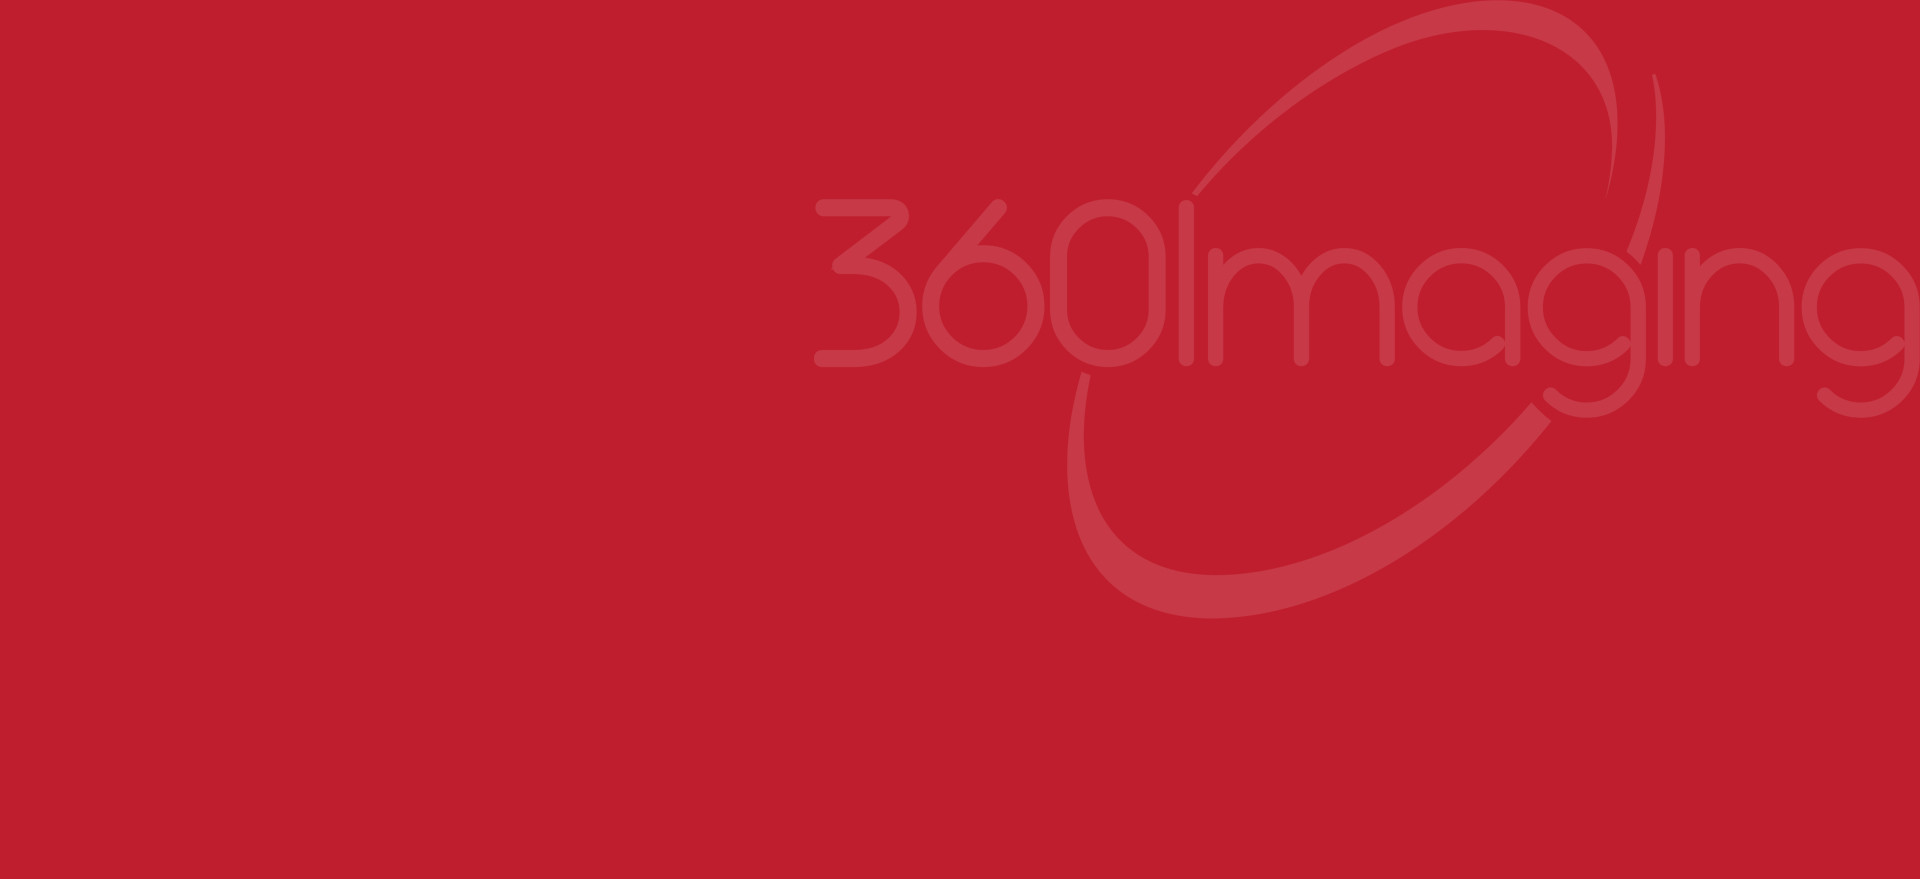 360_banner_red